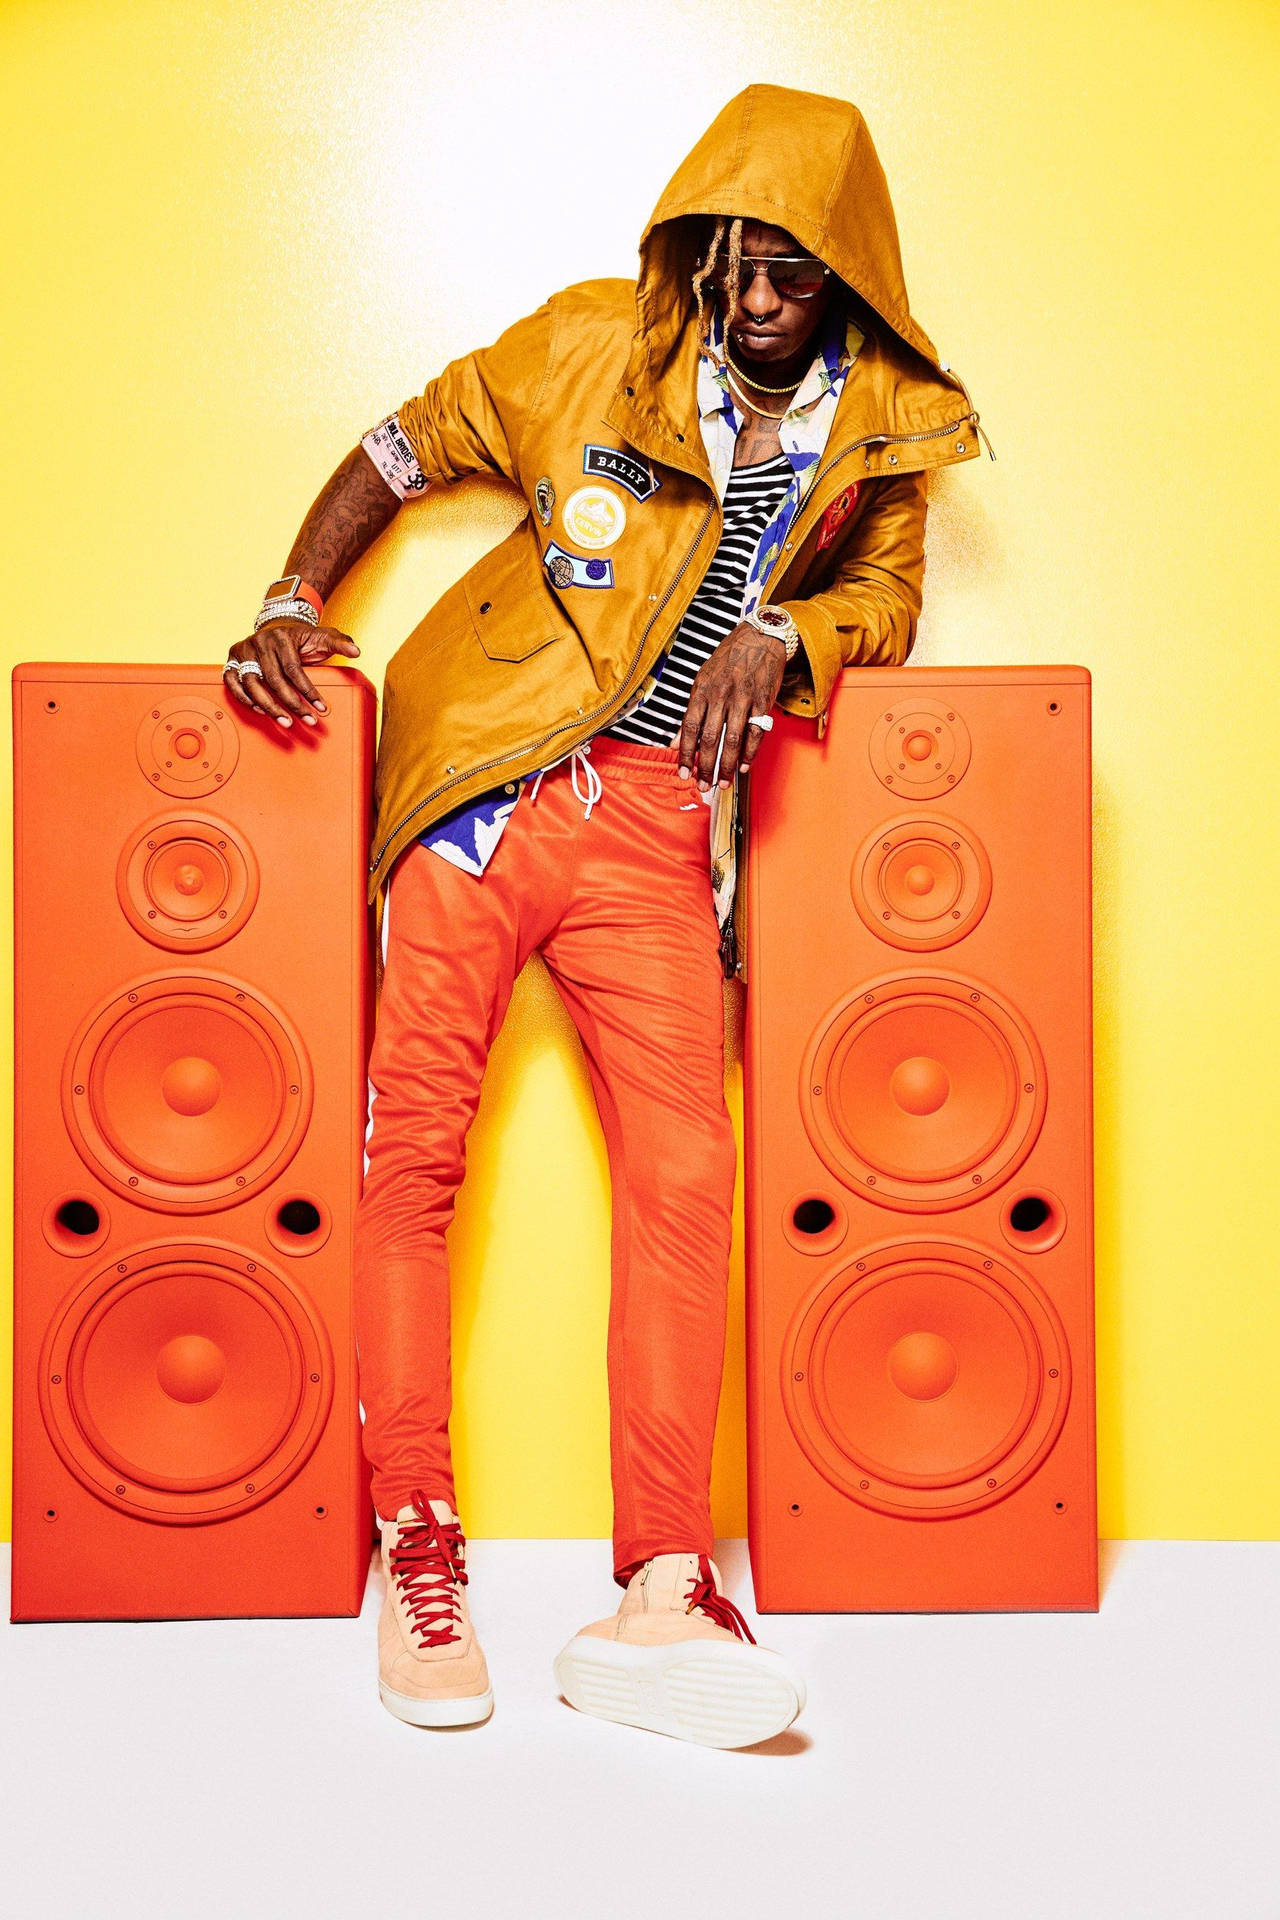 Young Thug Expresses His Eccentricity With An Orange Phone.